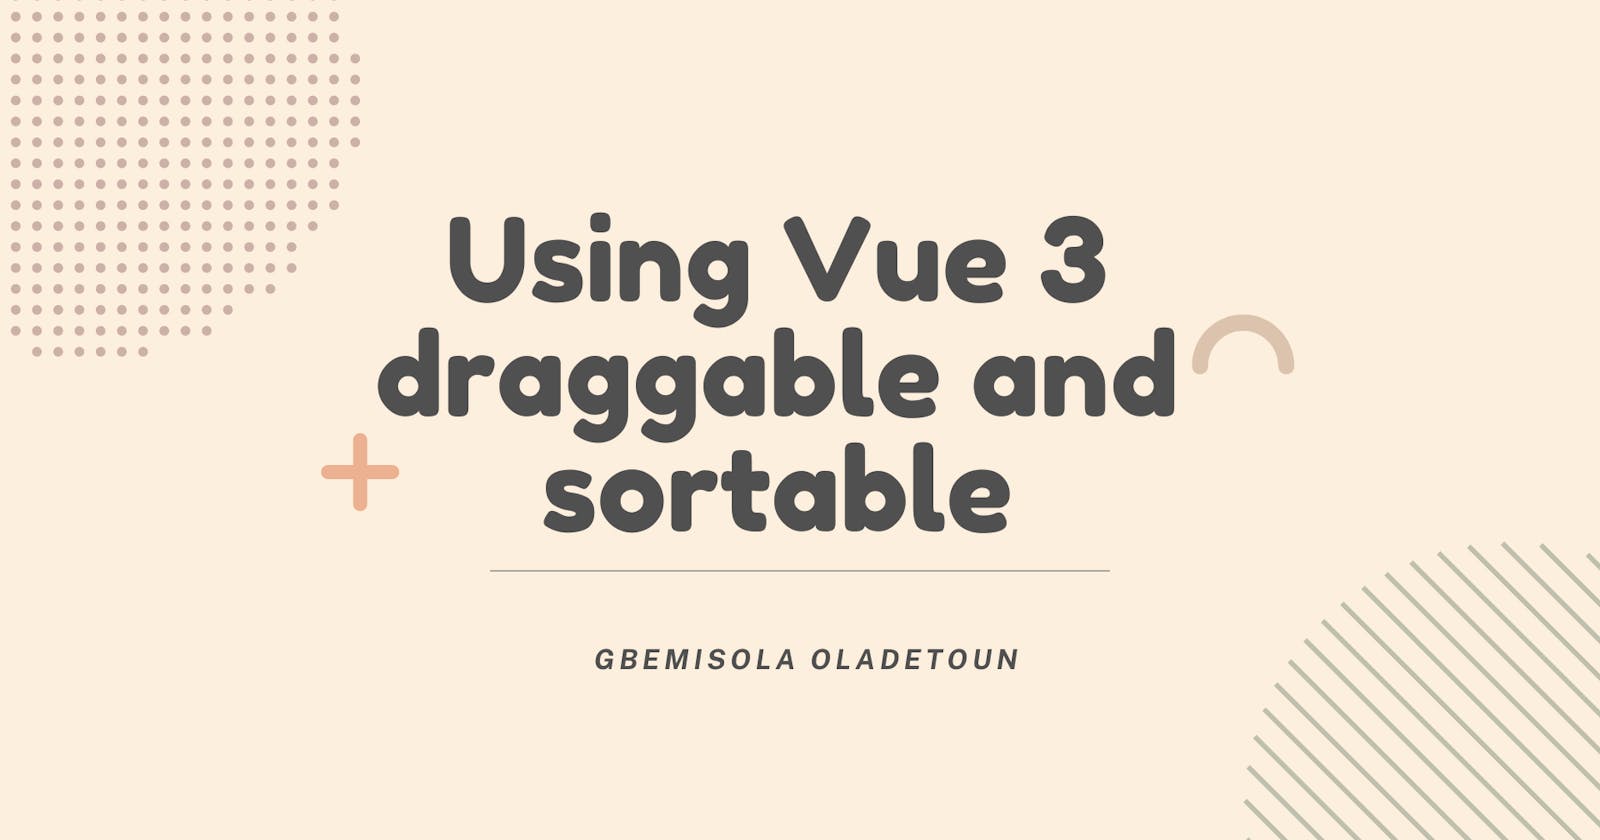 Using Vue 3 draggable and sortable